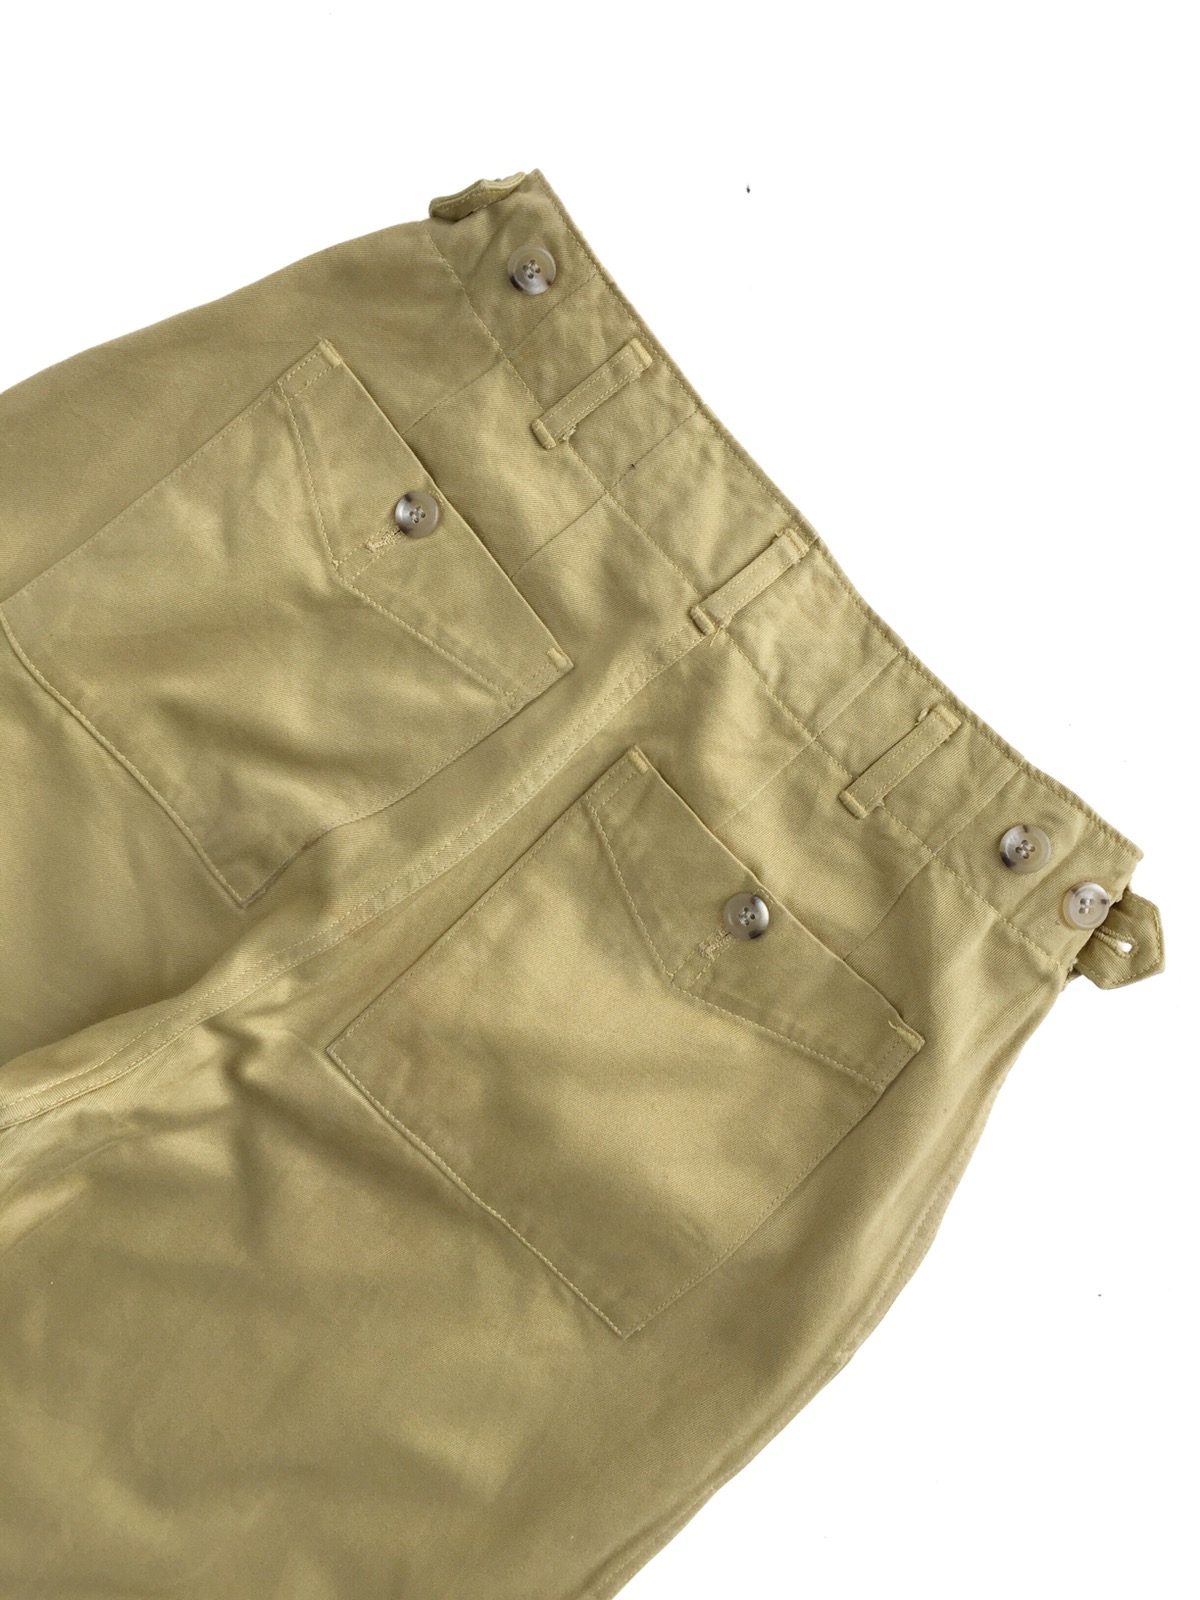 Nigel Cabourn Military Army Design Baggy Trousers Pants - 4